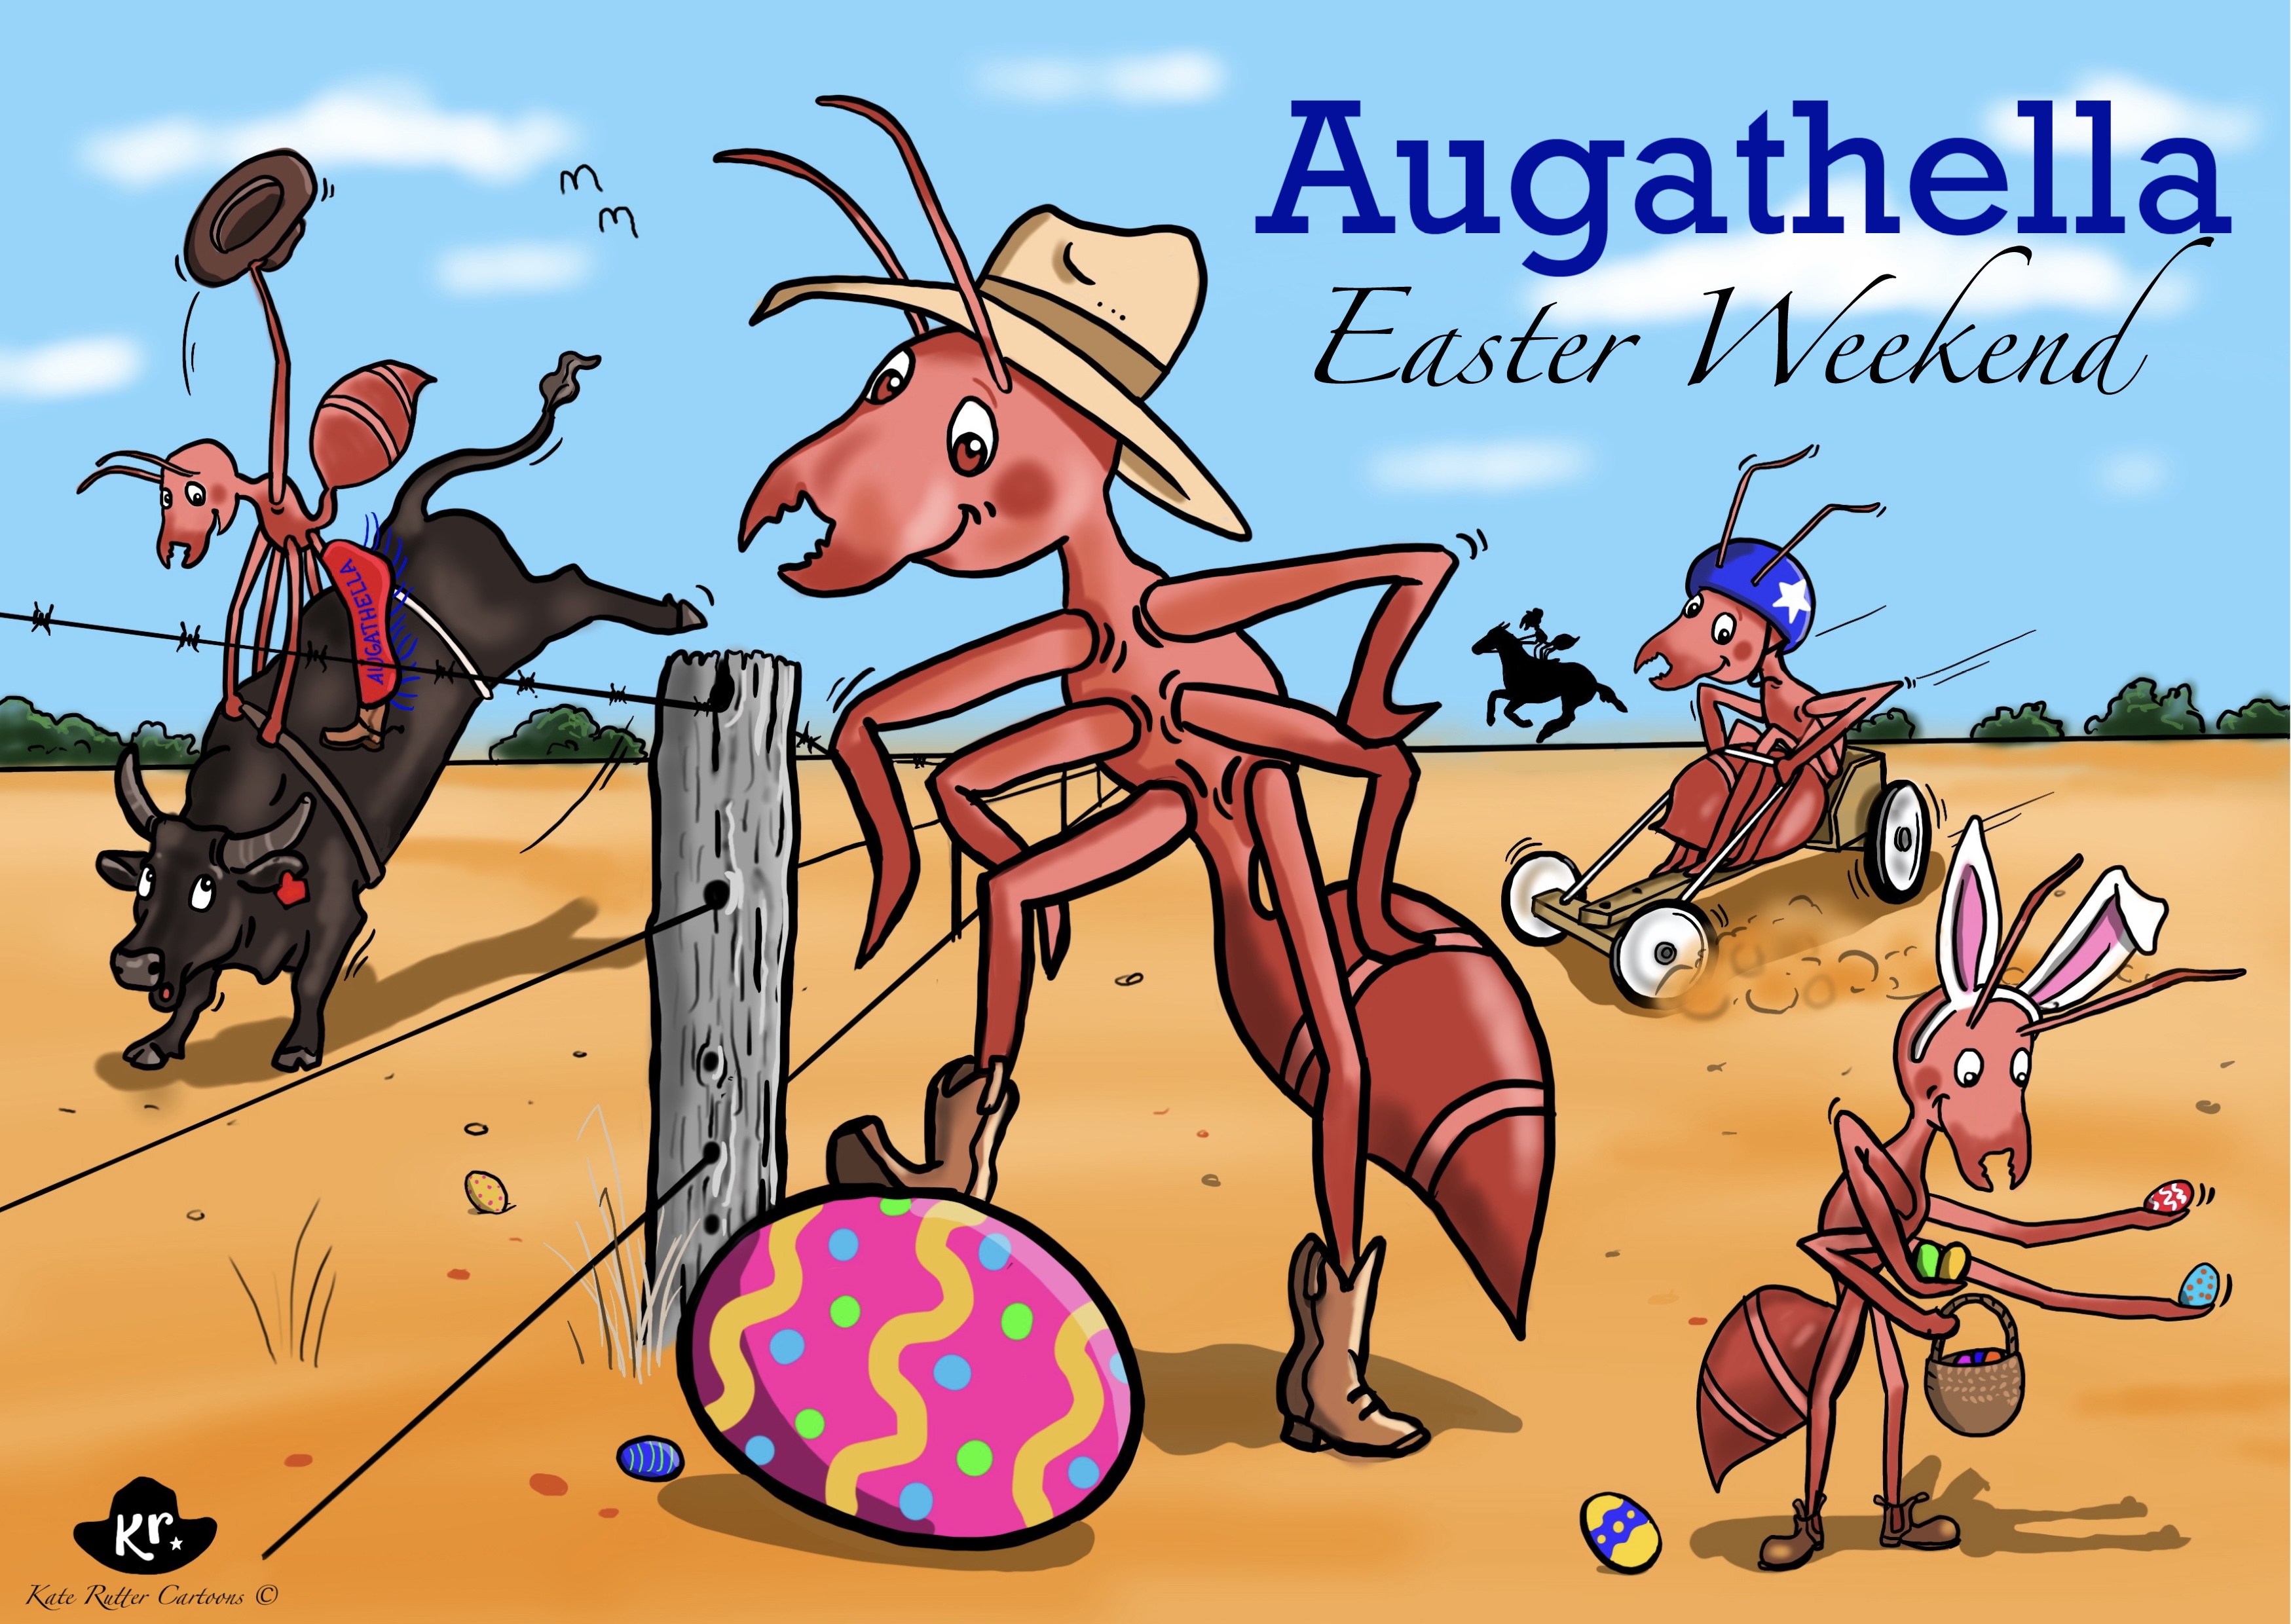 Augathella Easter Weekend: A Three-Day Outback Extravaganza for the Whole Family